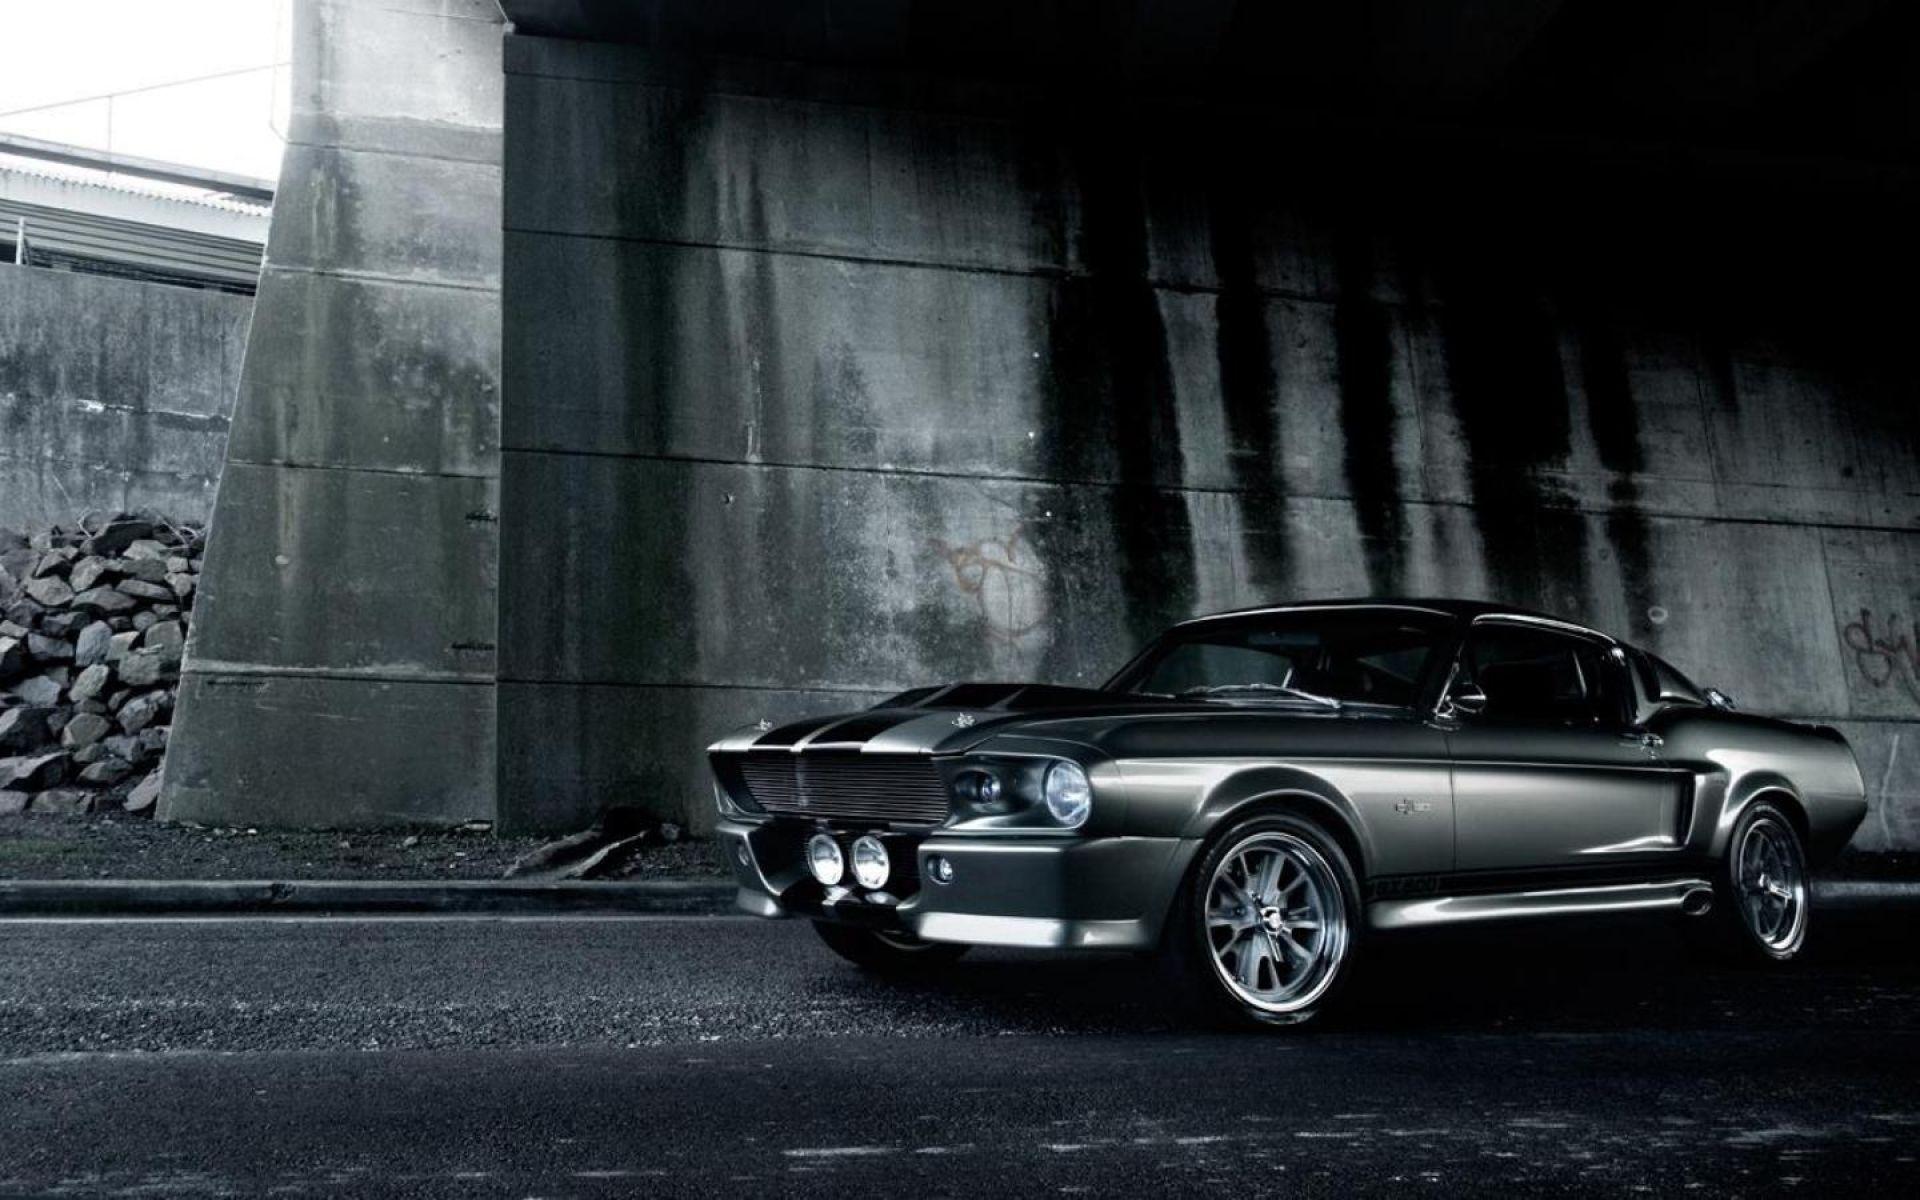 Ford Mustang 1967 Black HD Wallpaper, Background Image